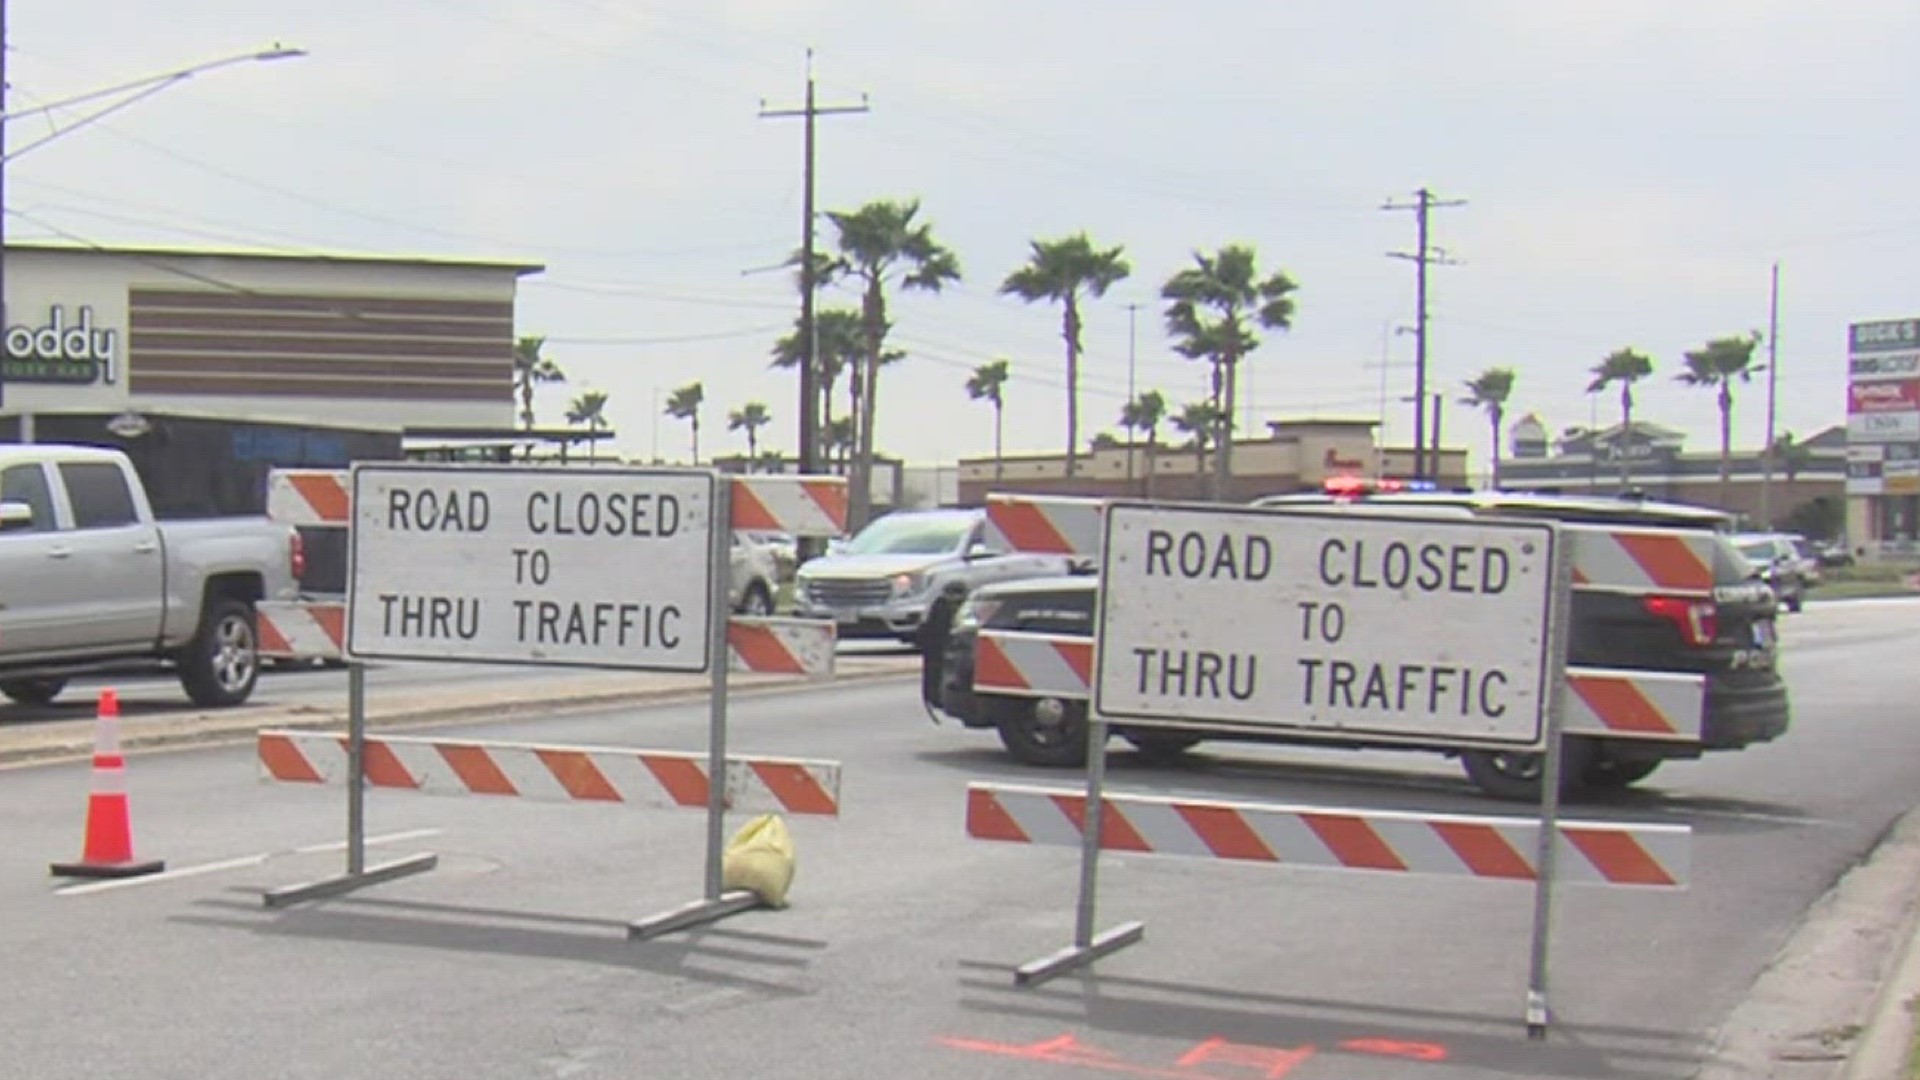 Emergency repairs cause detours at S. Staples Street & SPID